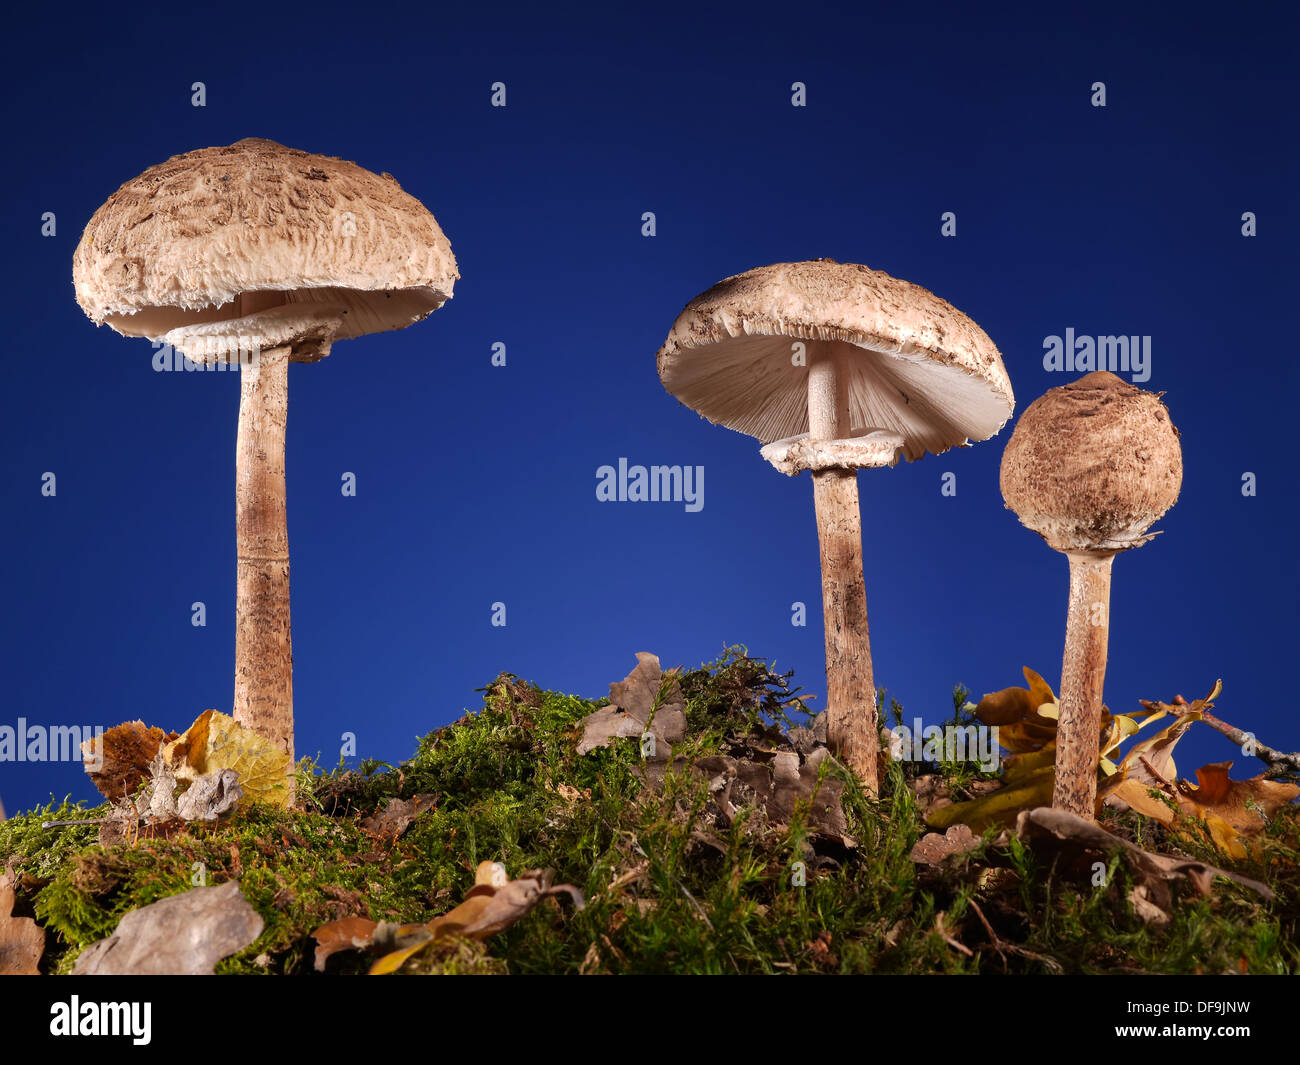 Three Parasol Fungus mushrooms growing in the forest Stock Photo